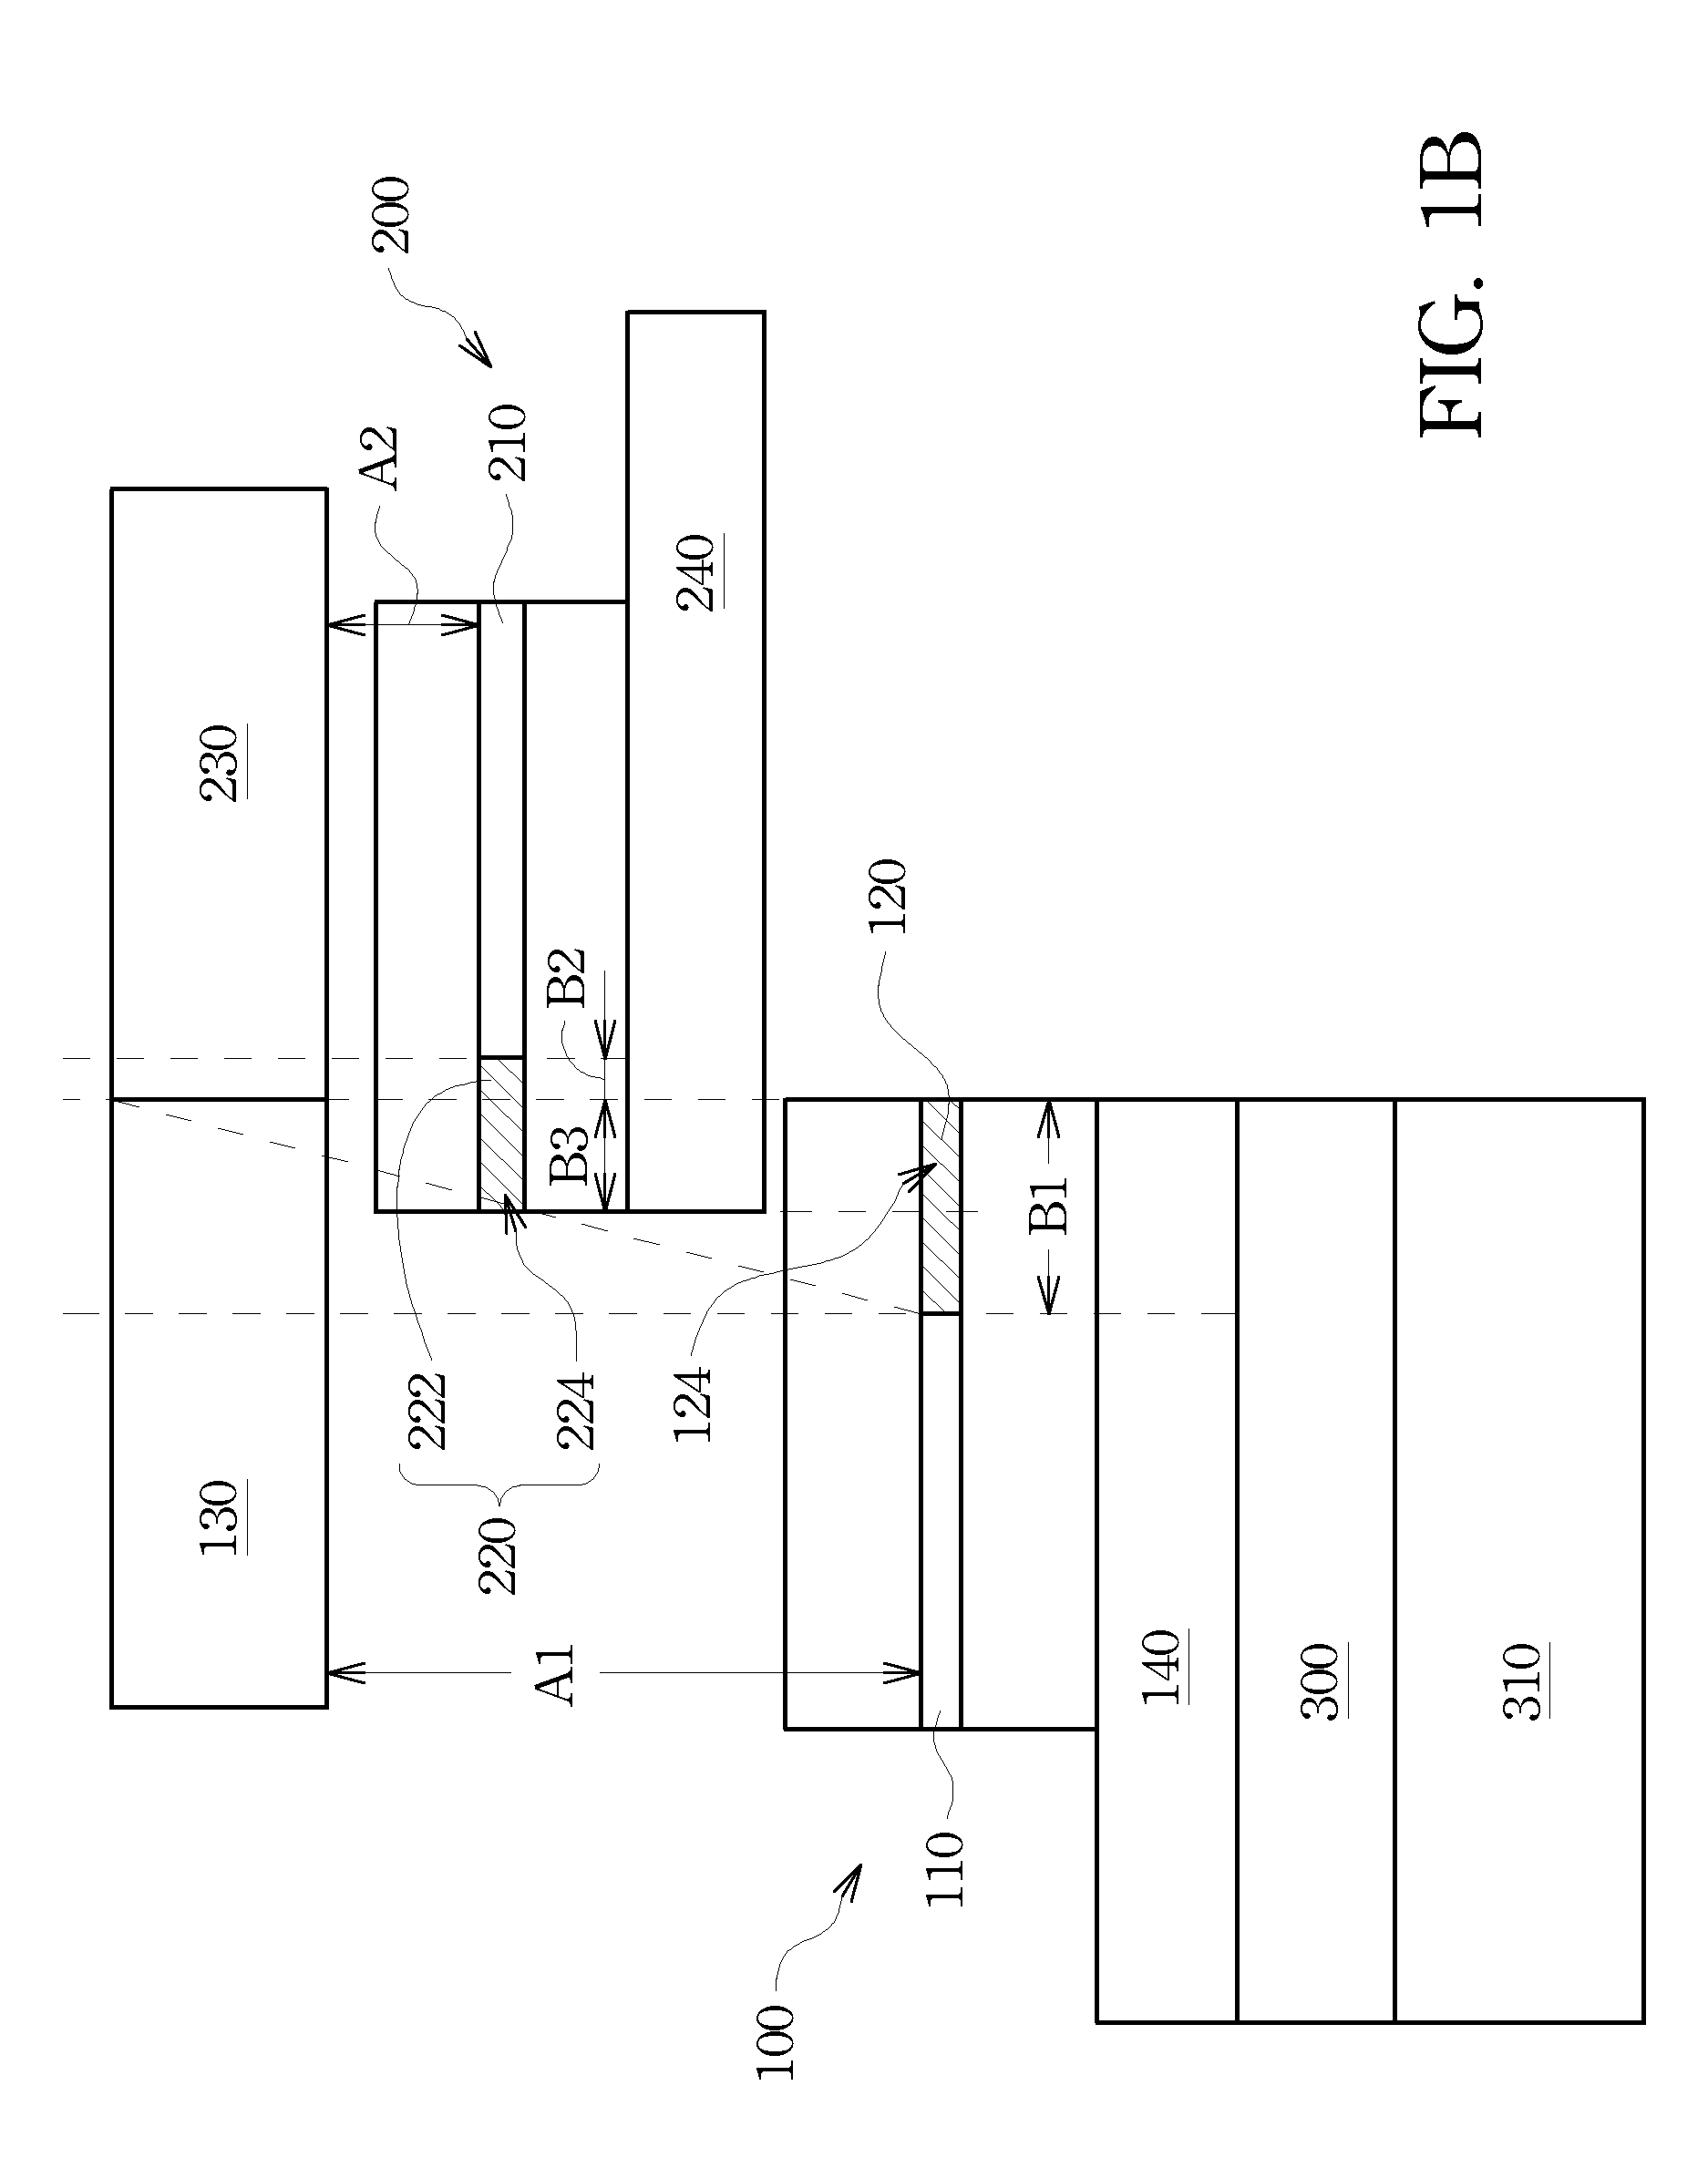 Multi-Section Visual Display having Overlapping Structure